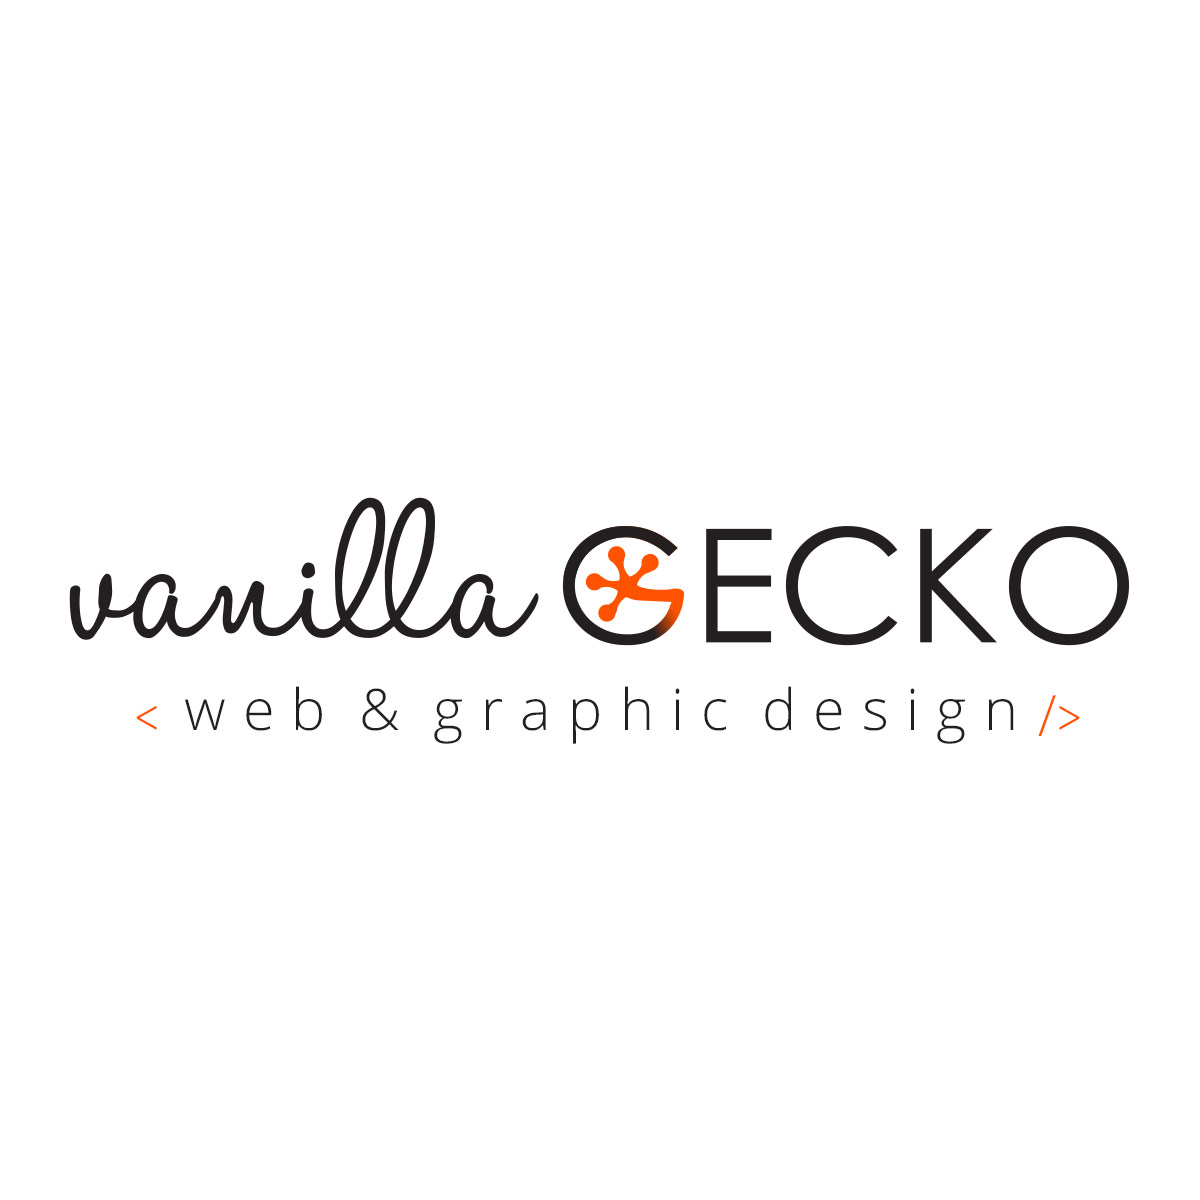 Search Engine Optimisation (SEO) – What Does it Involve? | Vanilla Gecko Web & Graphic Design : Articles